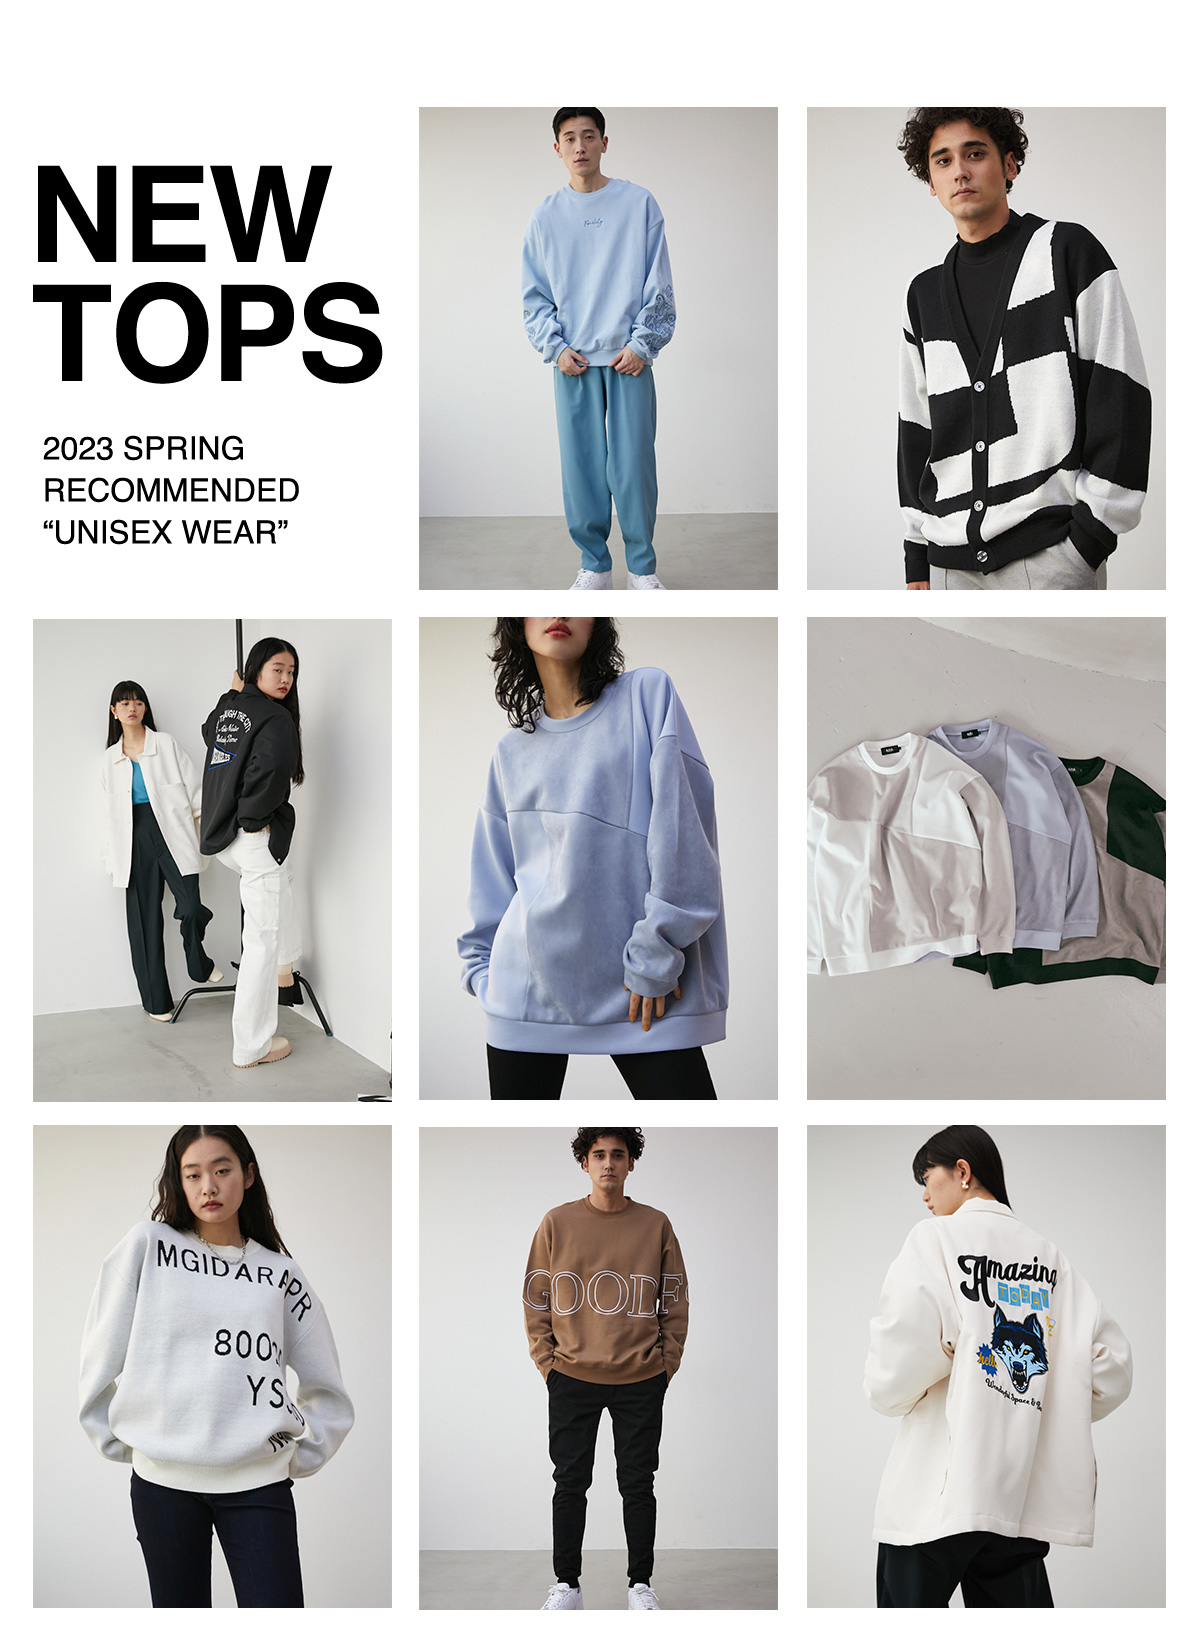 NEW TOPS 2023 SPRING RECOMMENDED ”UNISEX WEAR”